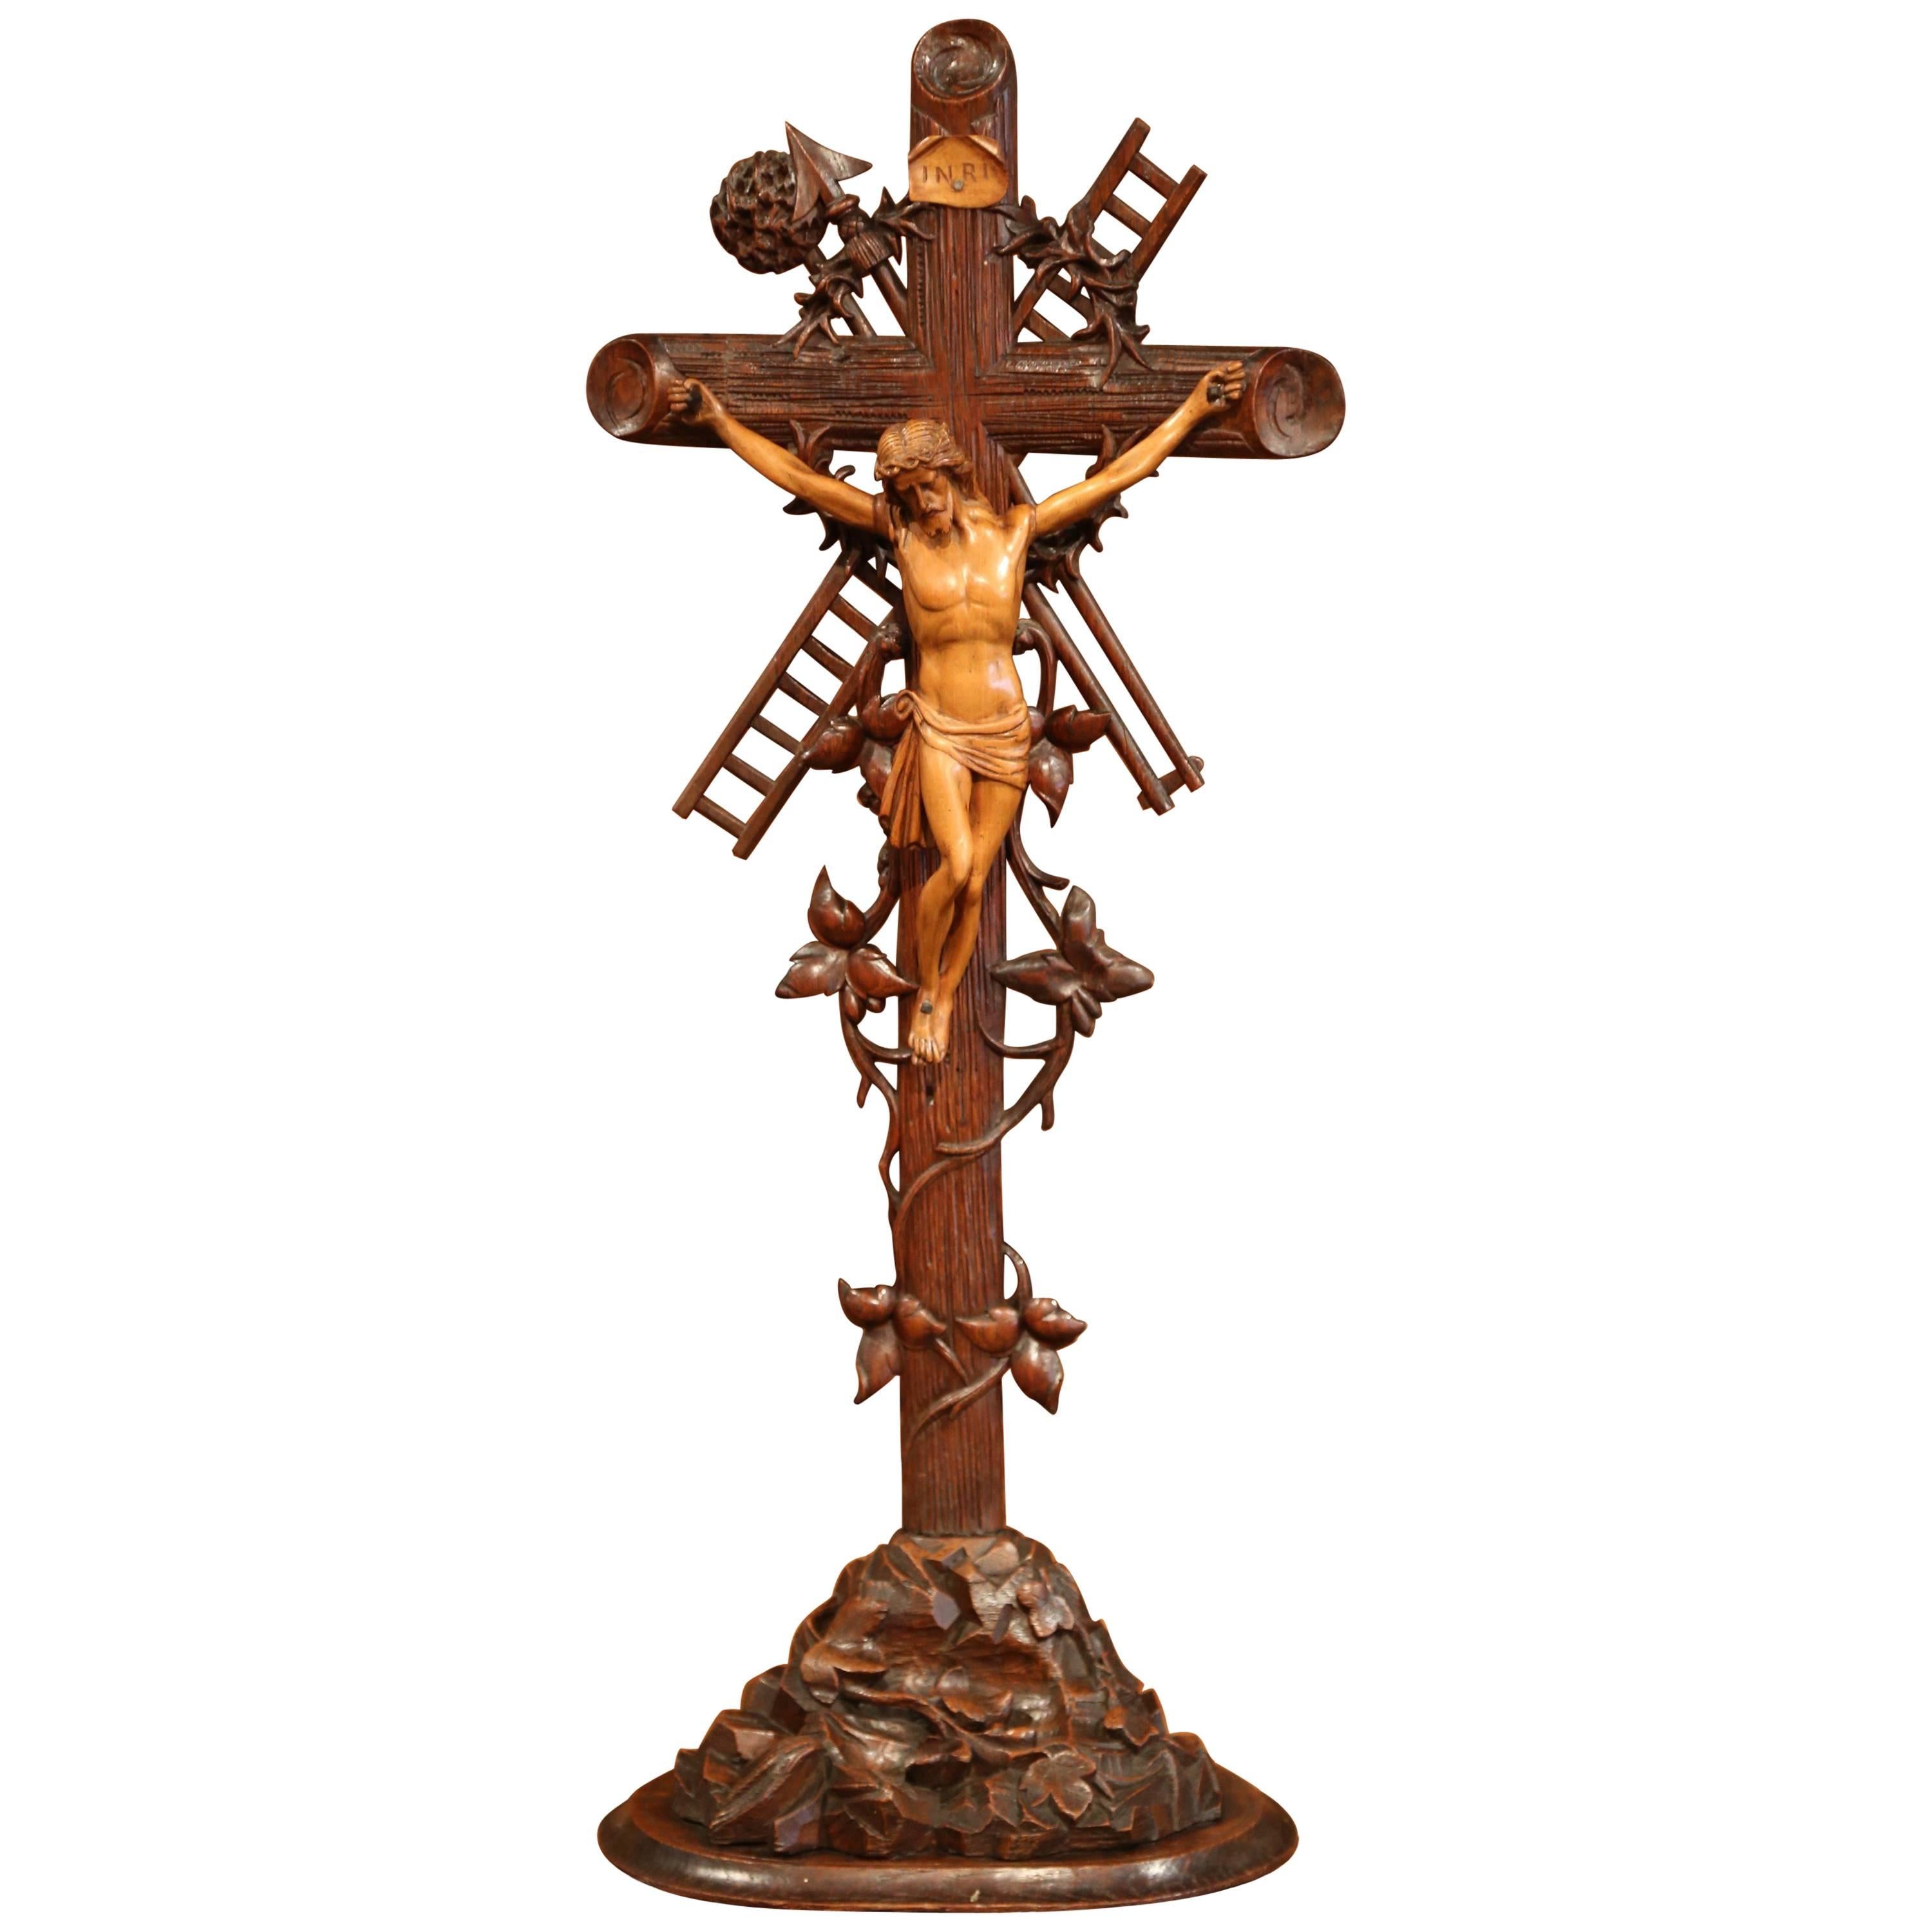 Tall 19th Century French Black Forest Carved Walnut Crucifix with Jesus Christ